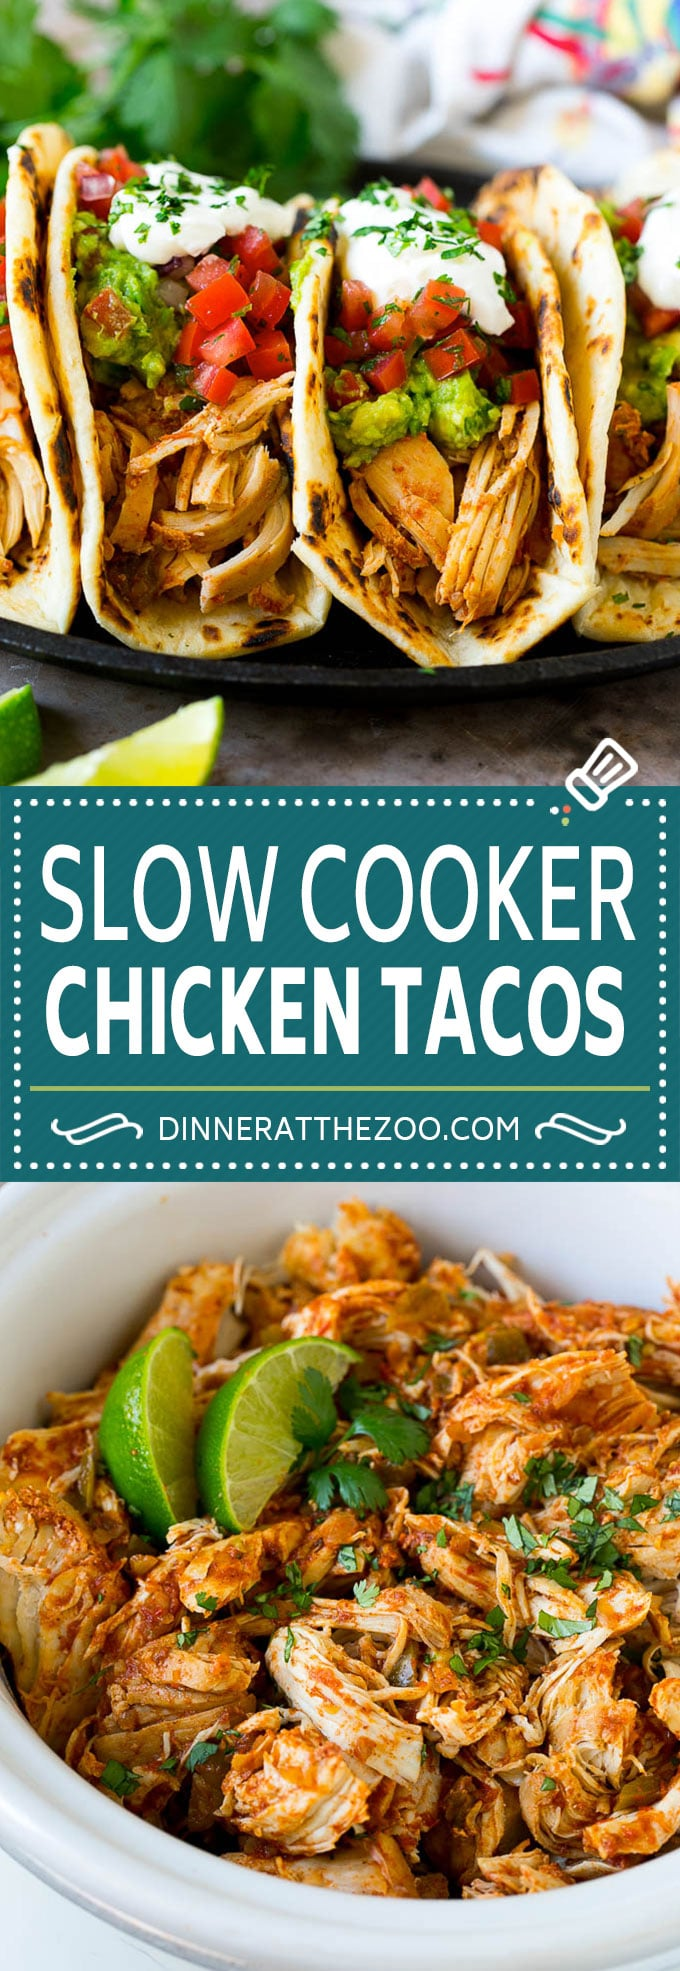 Slow Cooker Chicken Tacos - Dinner at the Zoo - Slow Cooker Chicken Tacos - Dinner at the Zoo -   18 dinner recipes chicken crockpot ideas